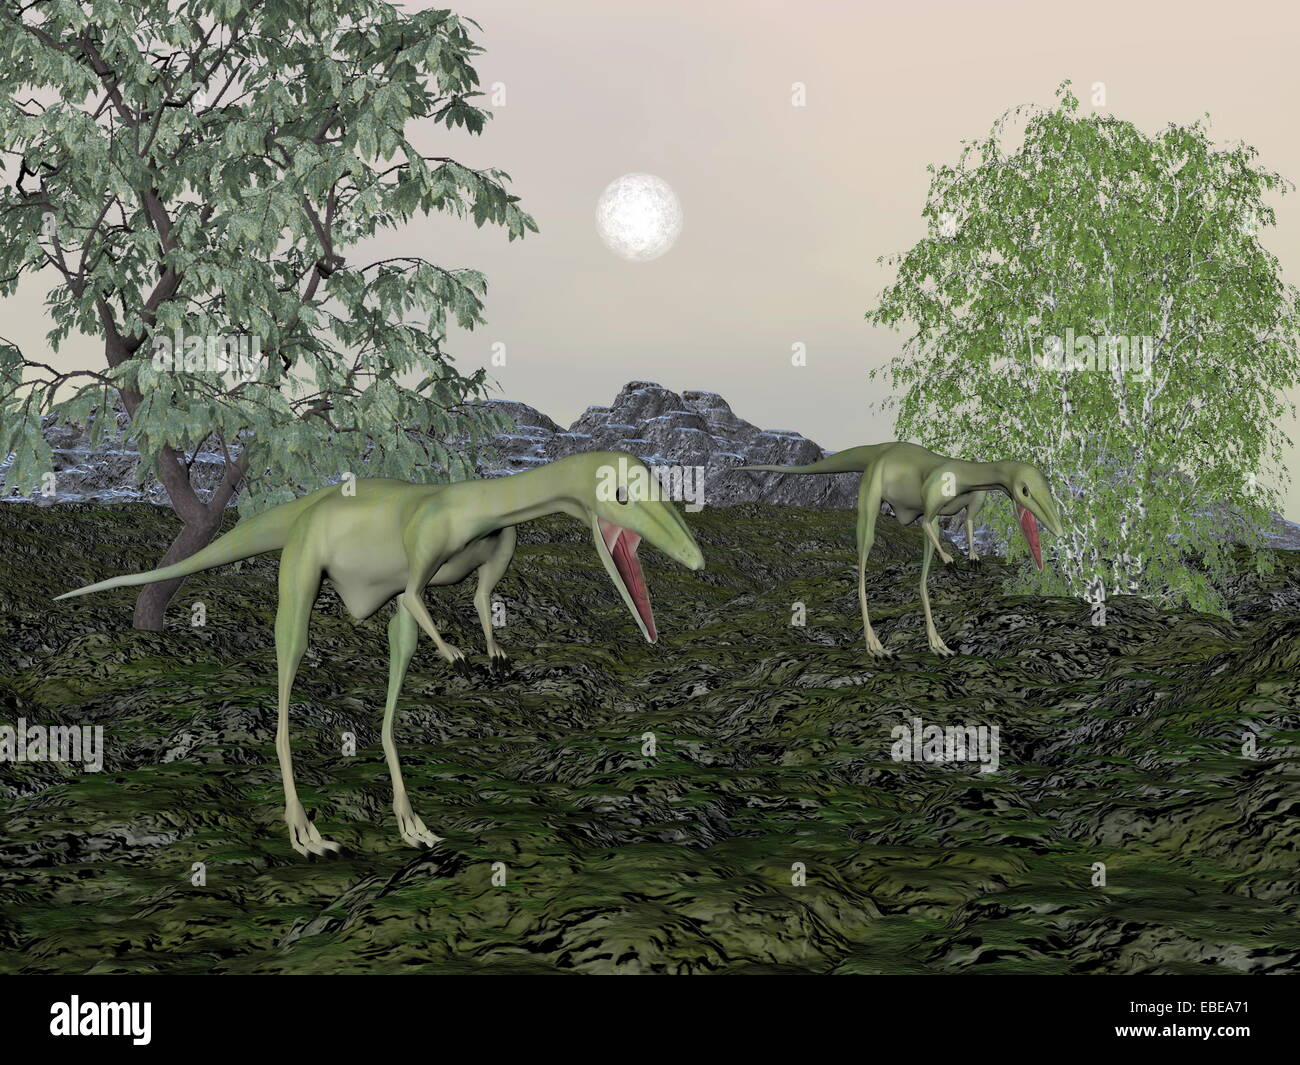 Two compsognathus dinosaurs standing in green landscape with trees Stock Photo